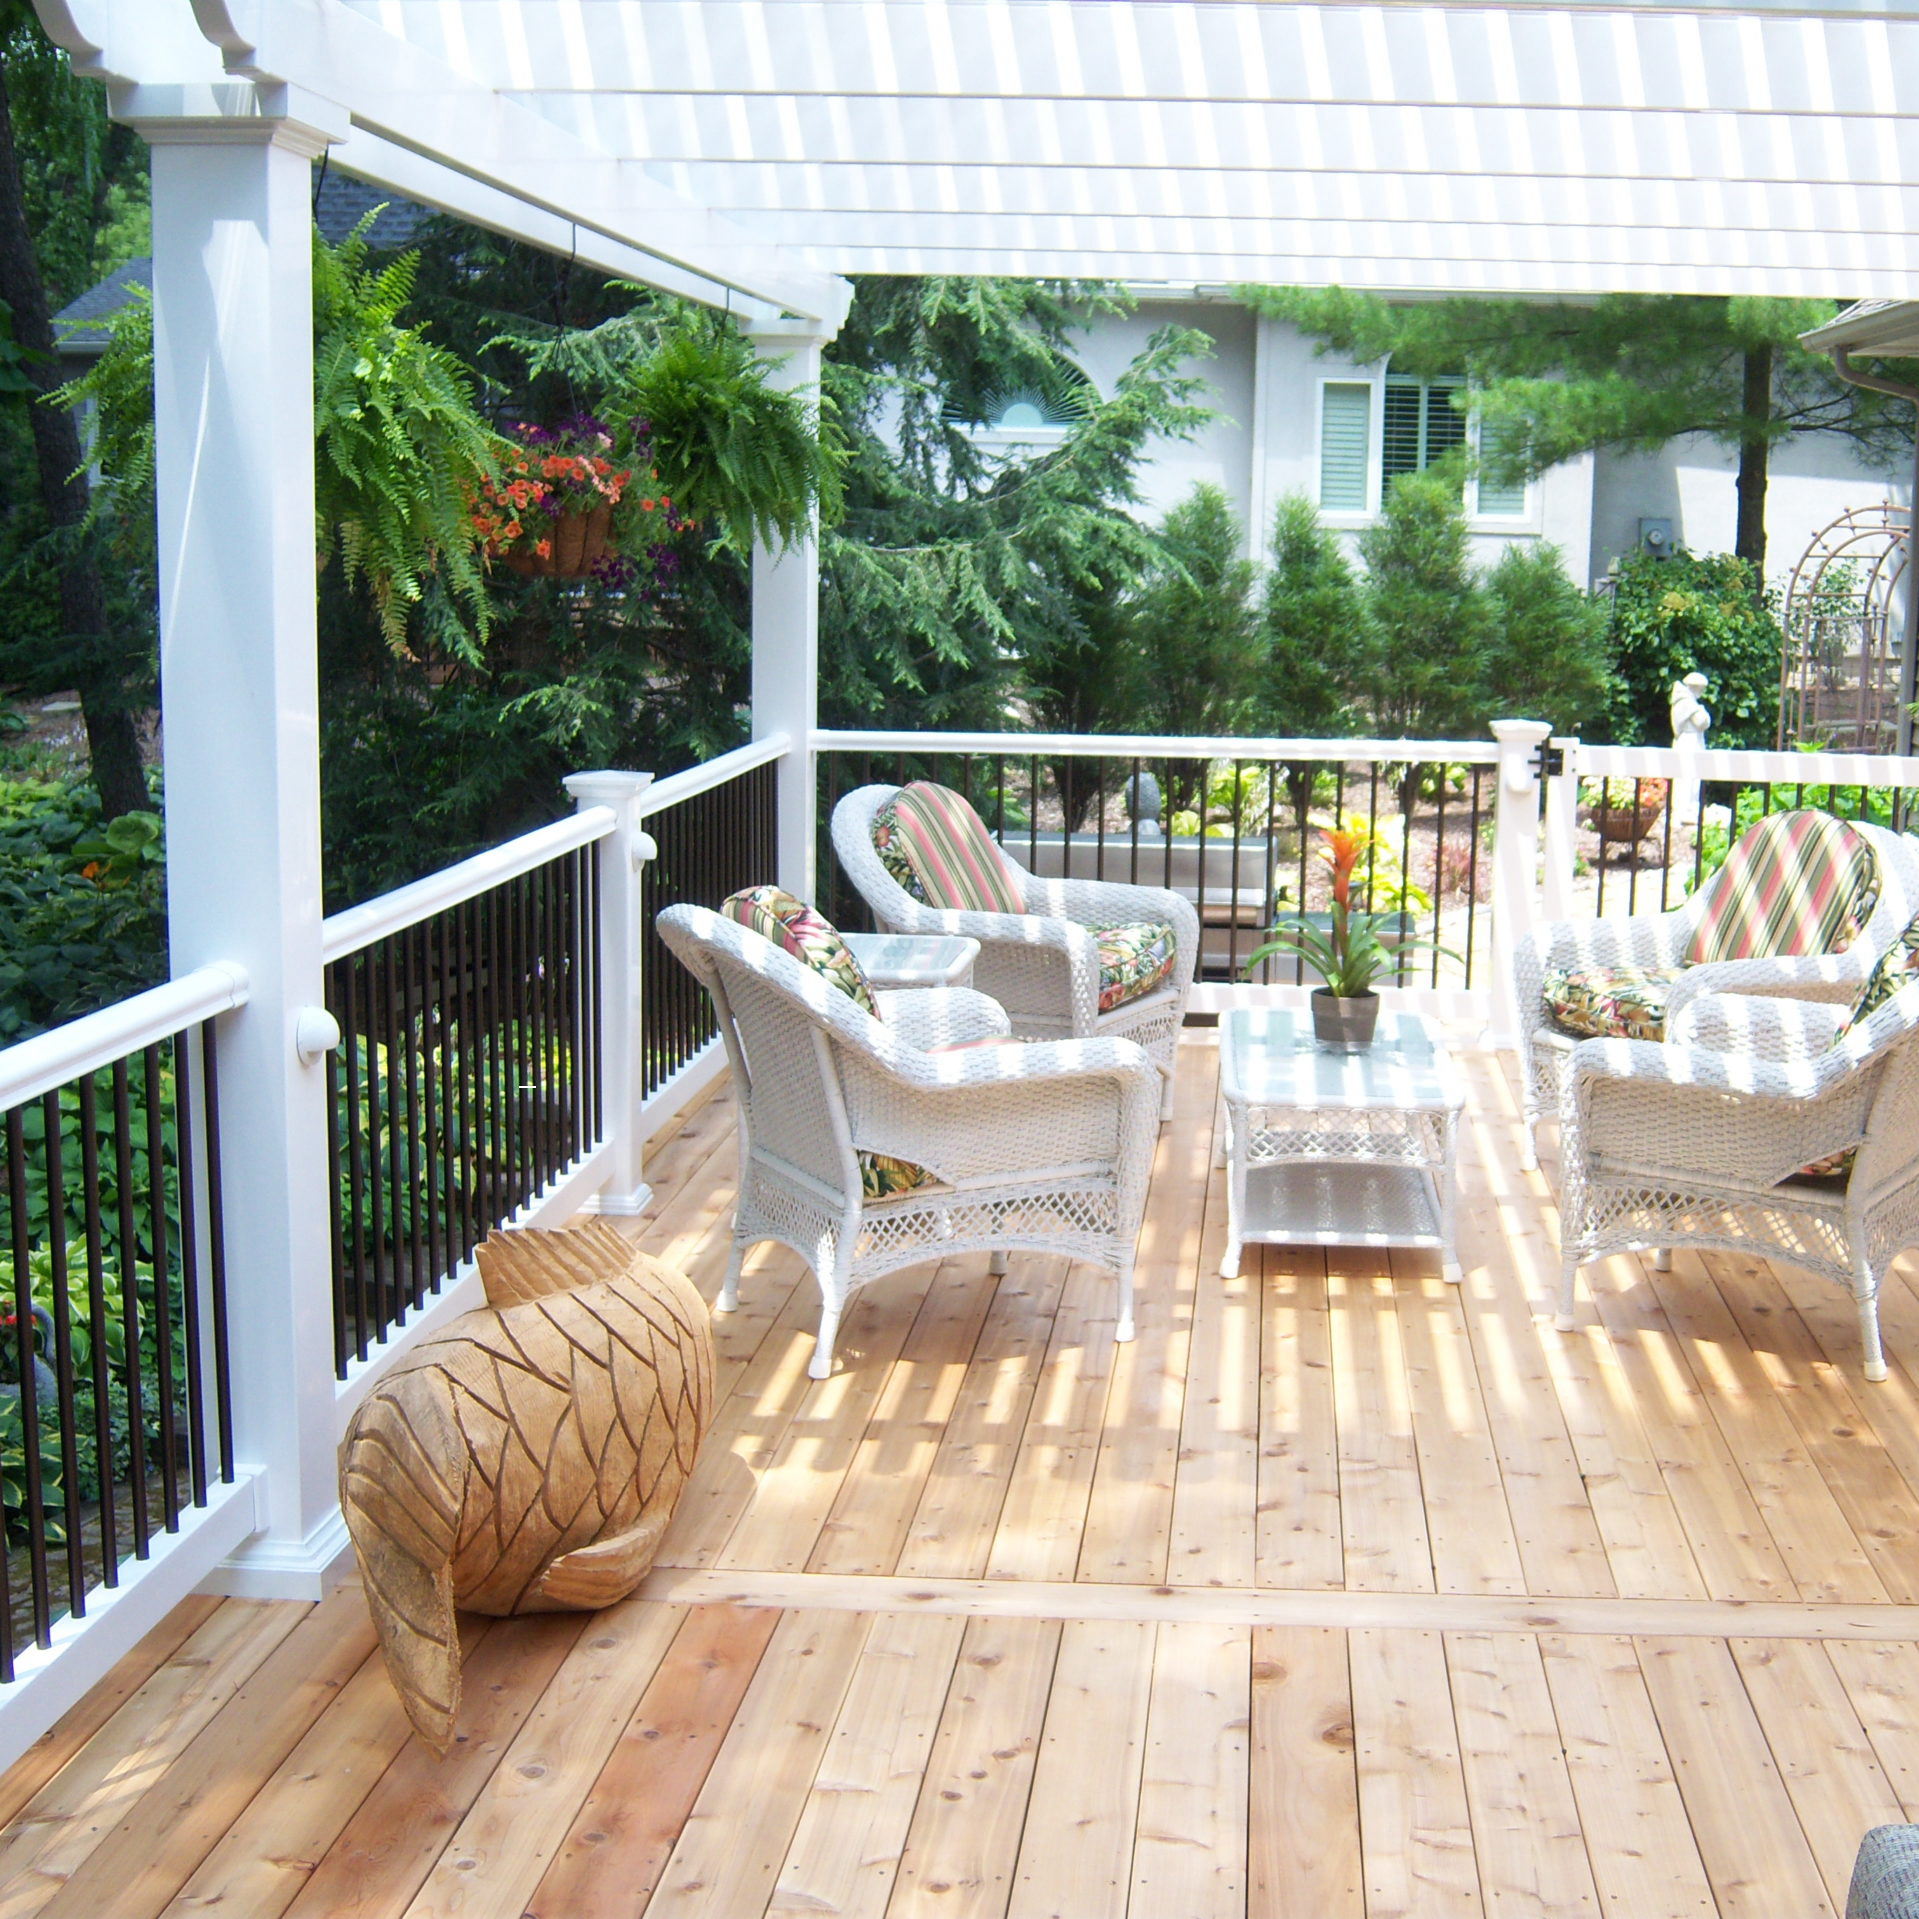 Picture taken underneath a house-attached pergola covering a beautiful wood deck with patio furniture